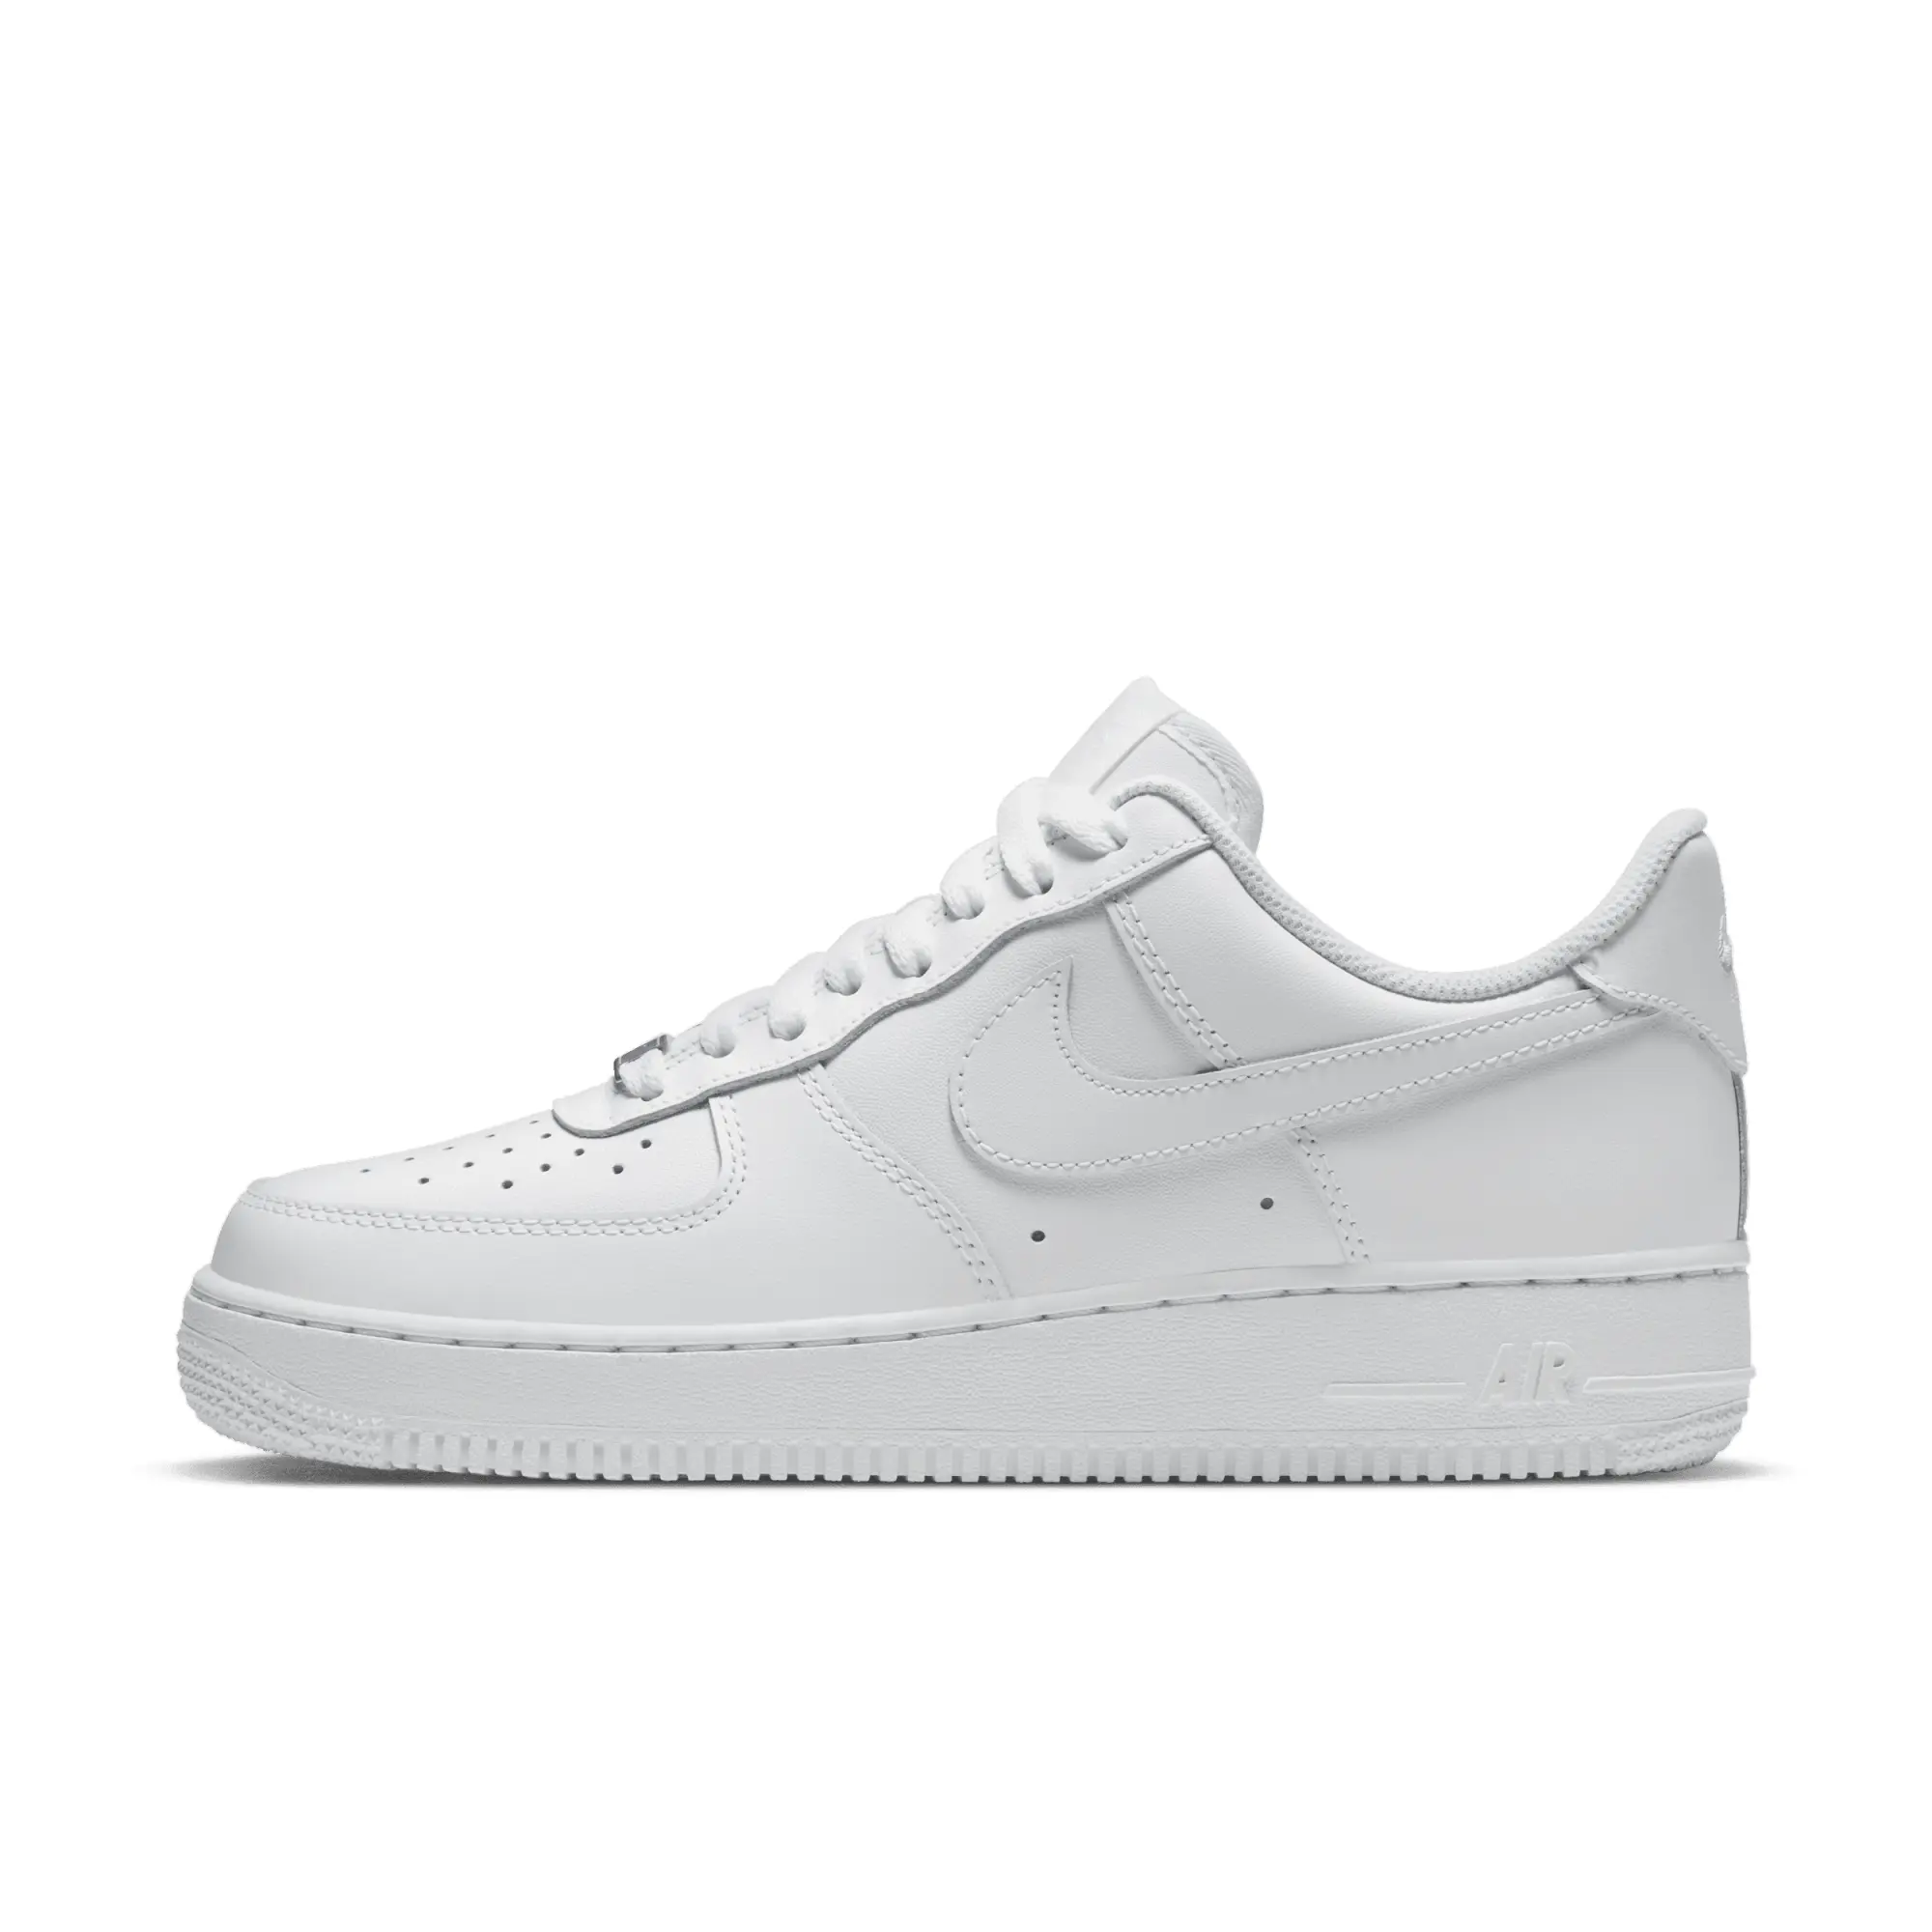 Nike Air Force 1 Low - White